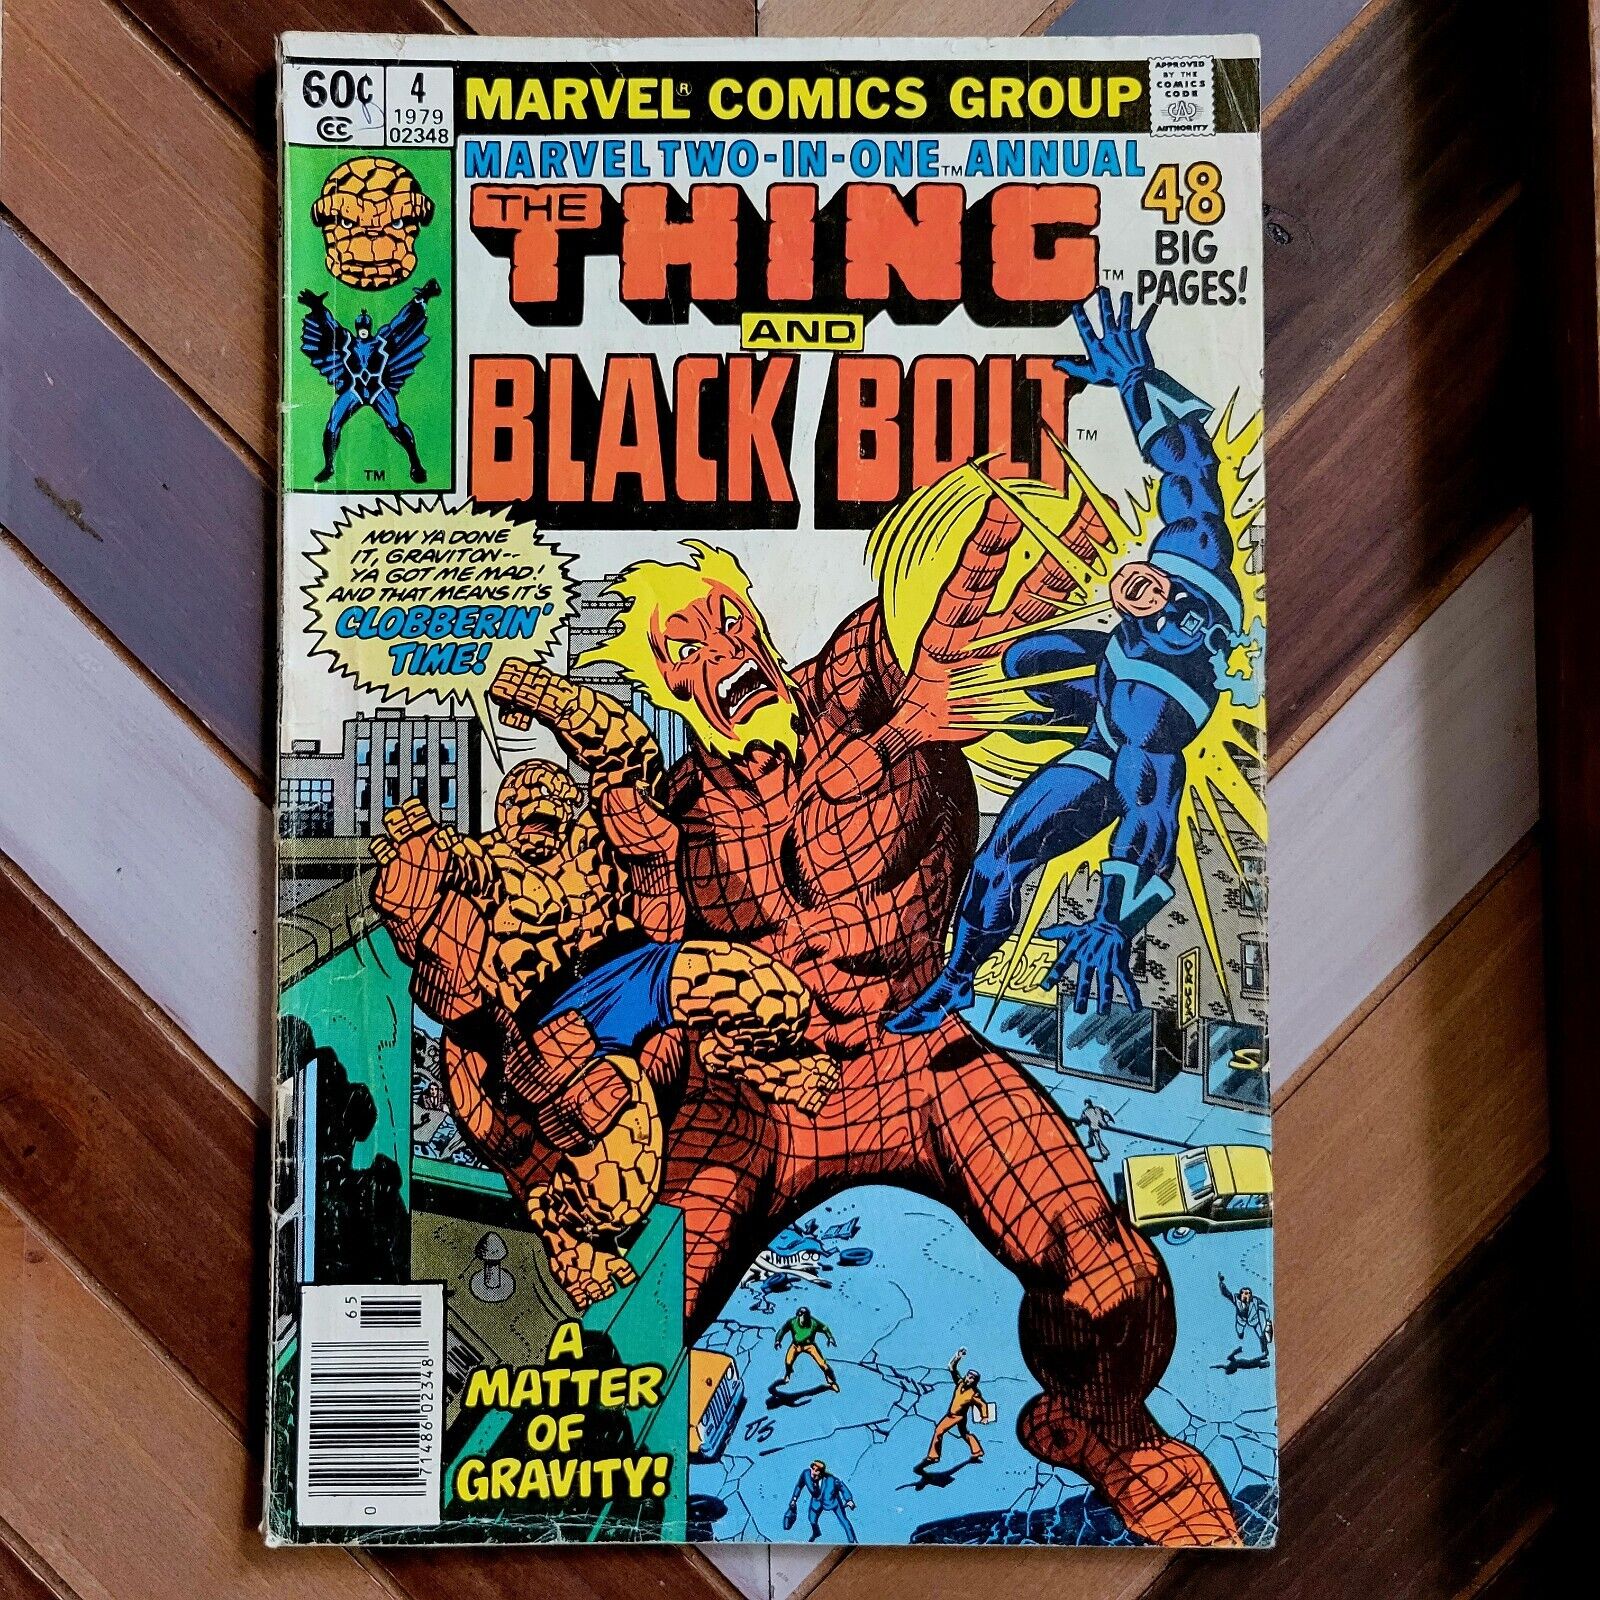 MARVEL Two-in-One ANNUAL #4 VG (1979) Co-starring BLACK BOLT \